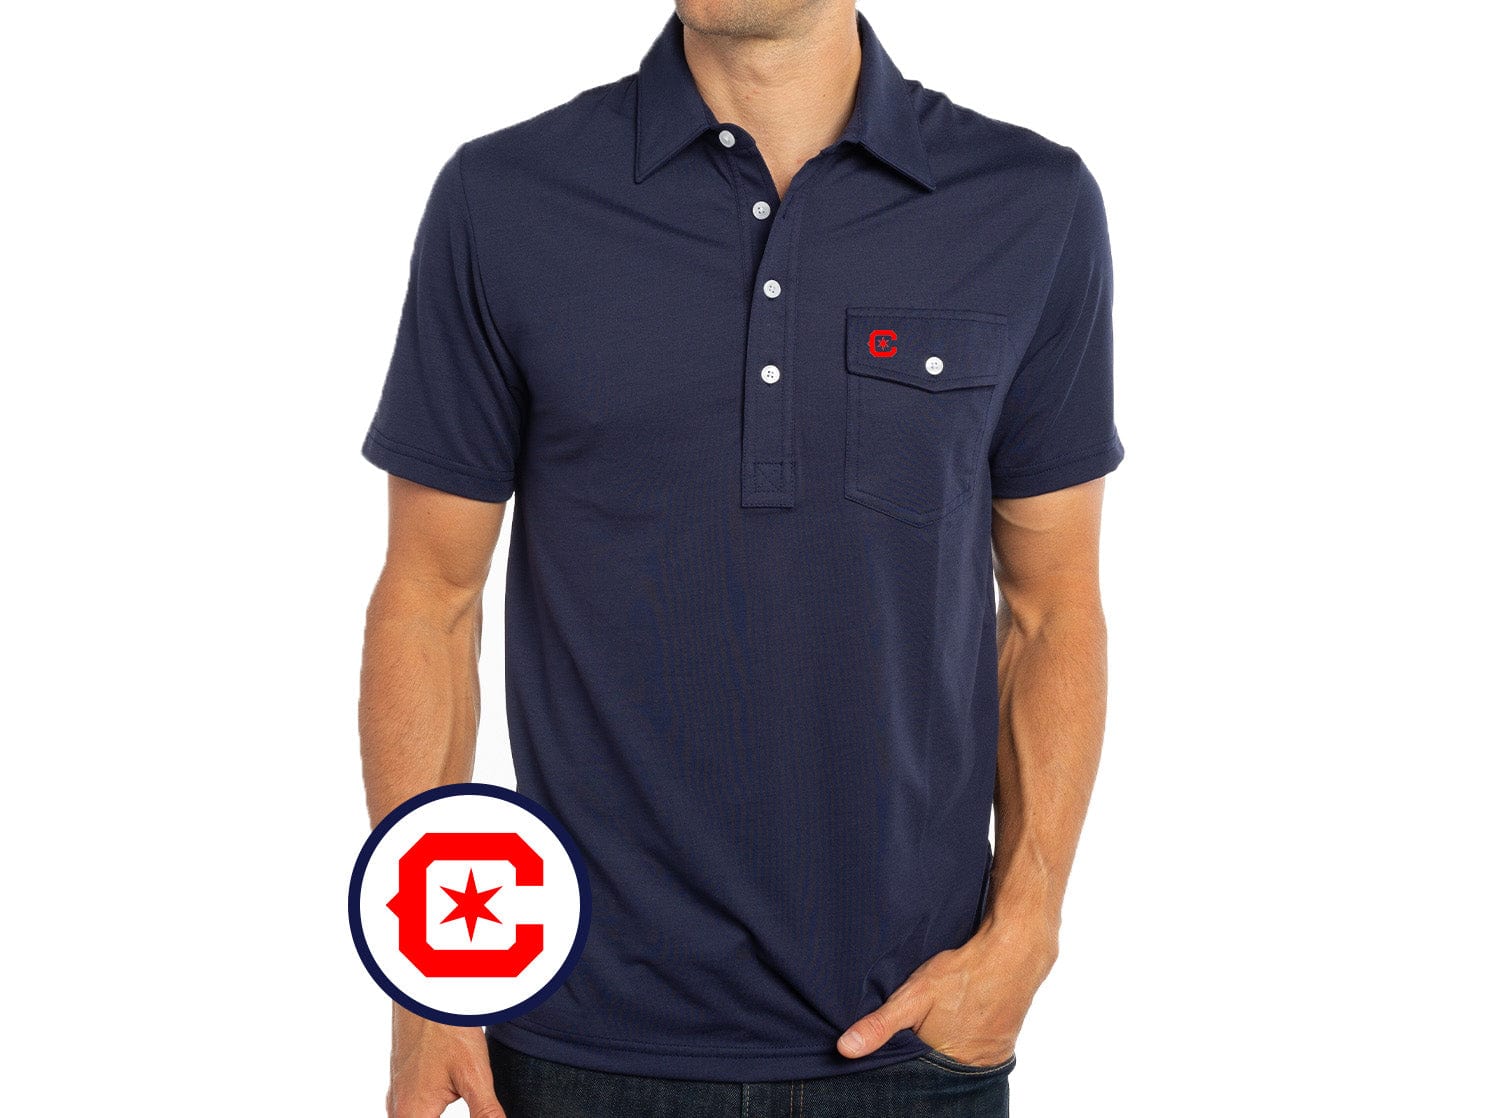 Chicago Fire - Performance Players Shirt - Star - Navy